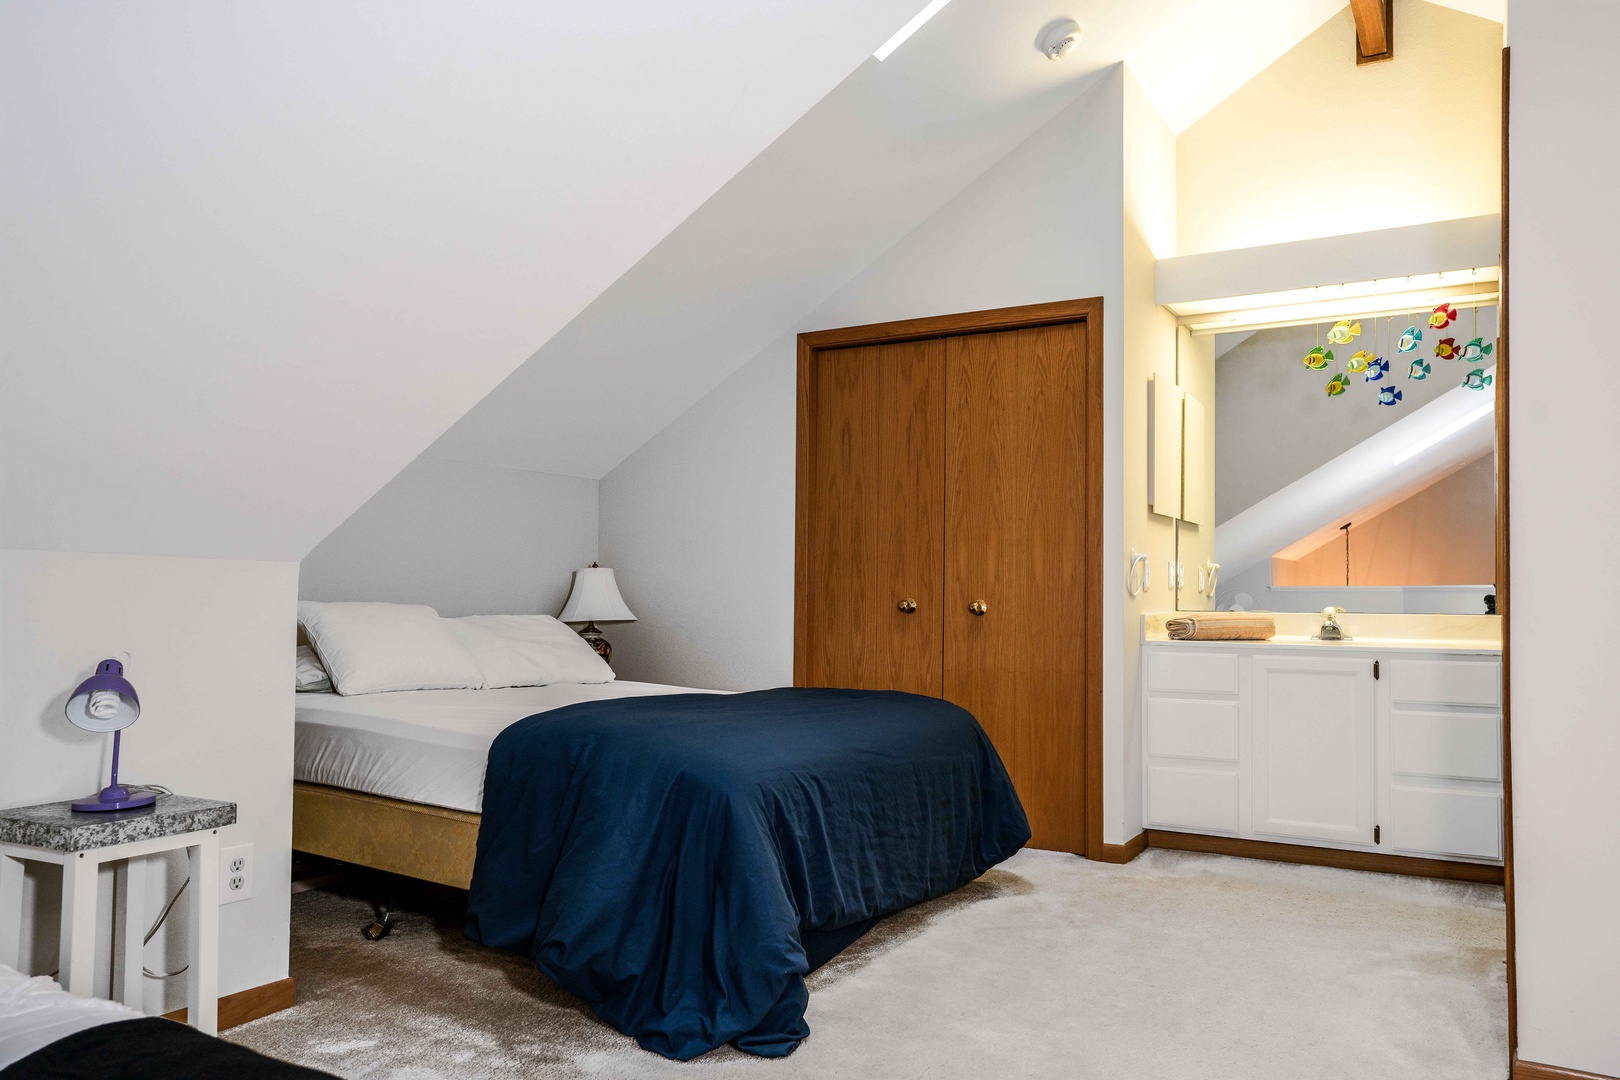 The loft contains a twin bed, queen bed & shared full bathroom